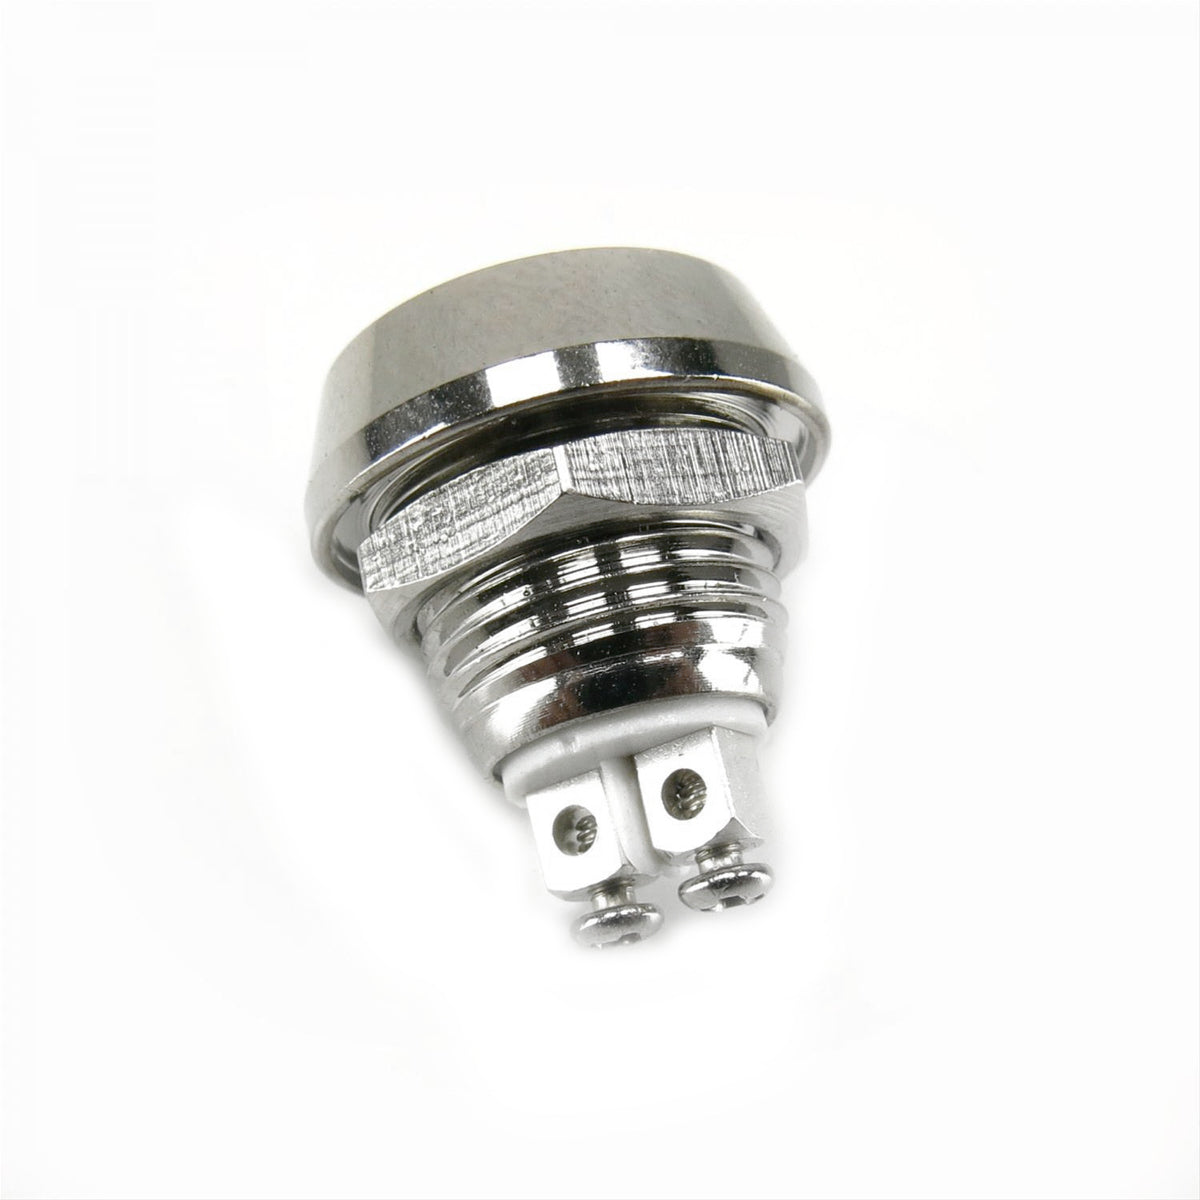 Auto-Loc 12mm Domed Momentary Billet Button AULAUTSW45